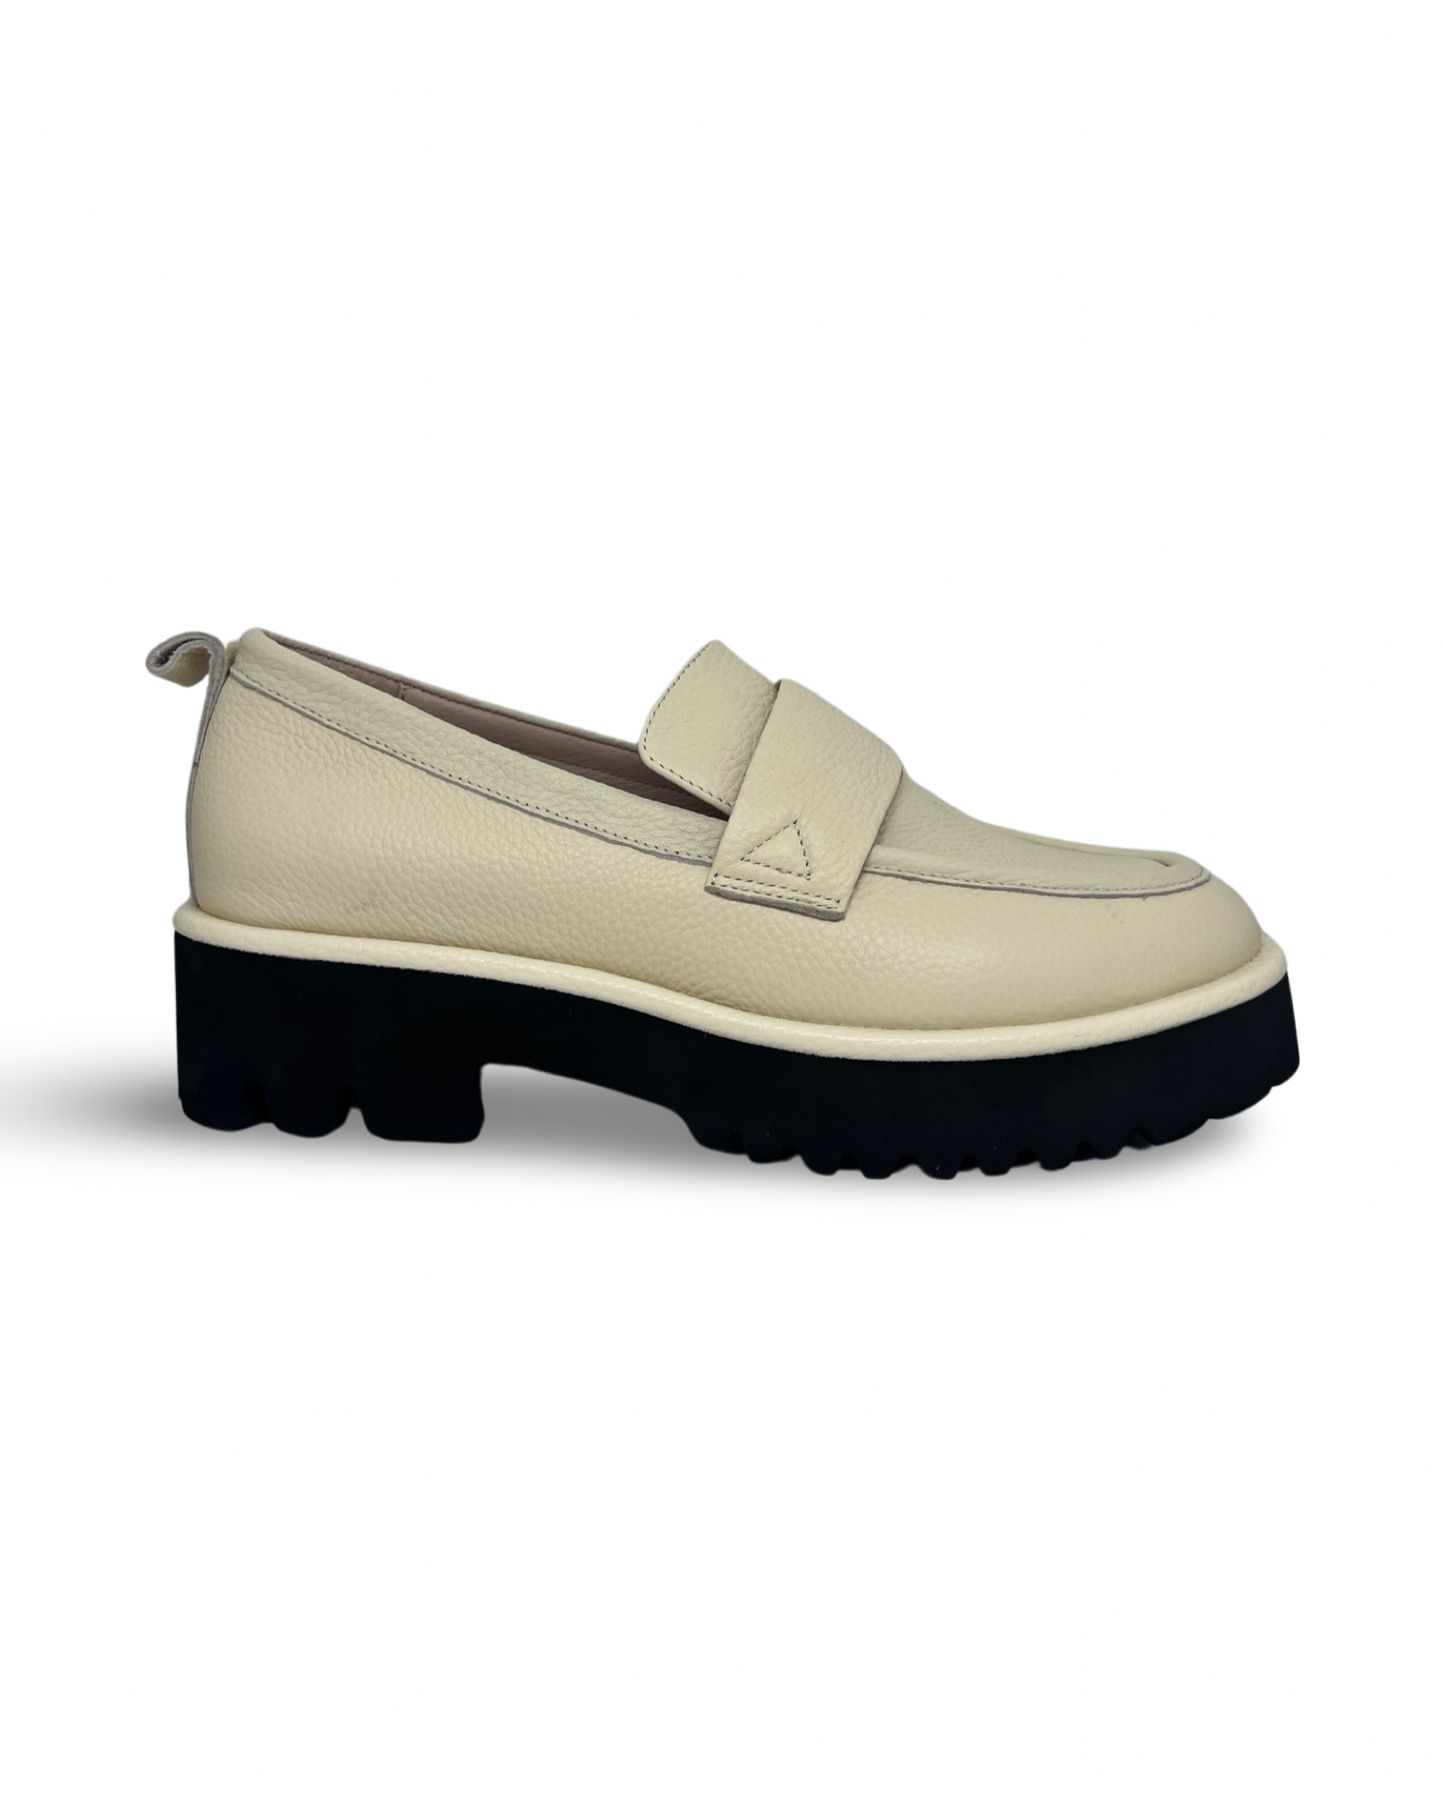 Hipster Loafer By Andrea Biani - Oat